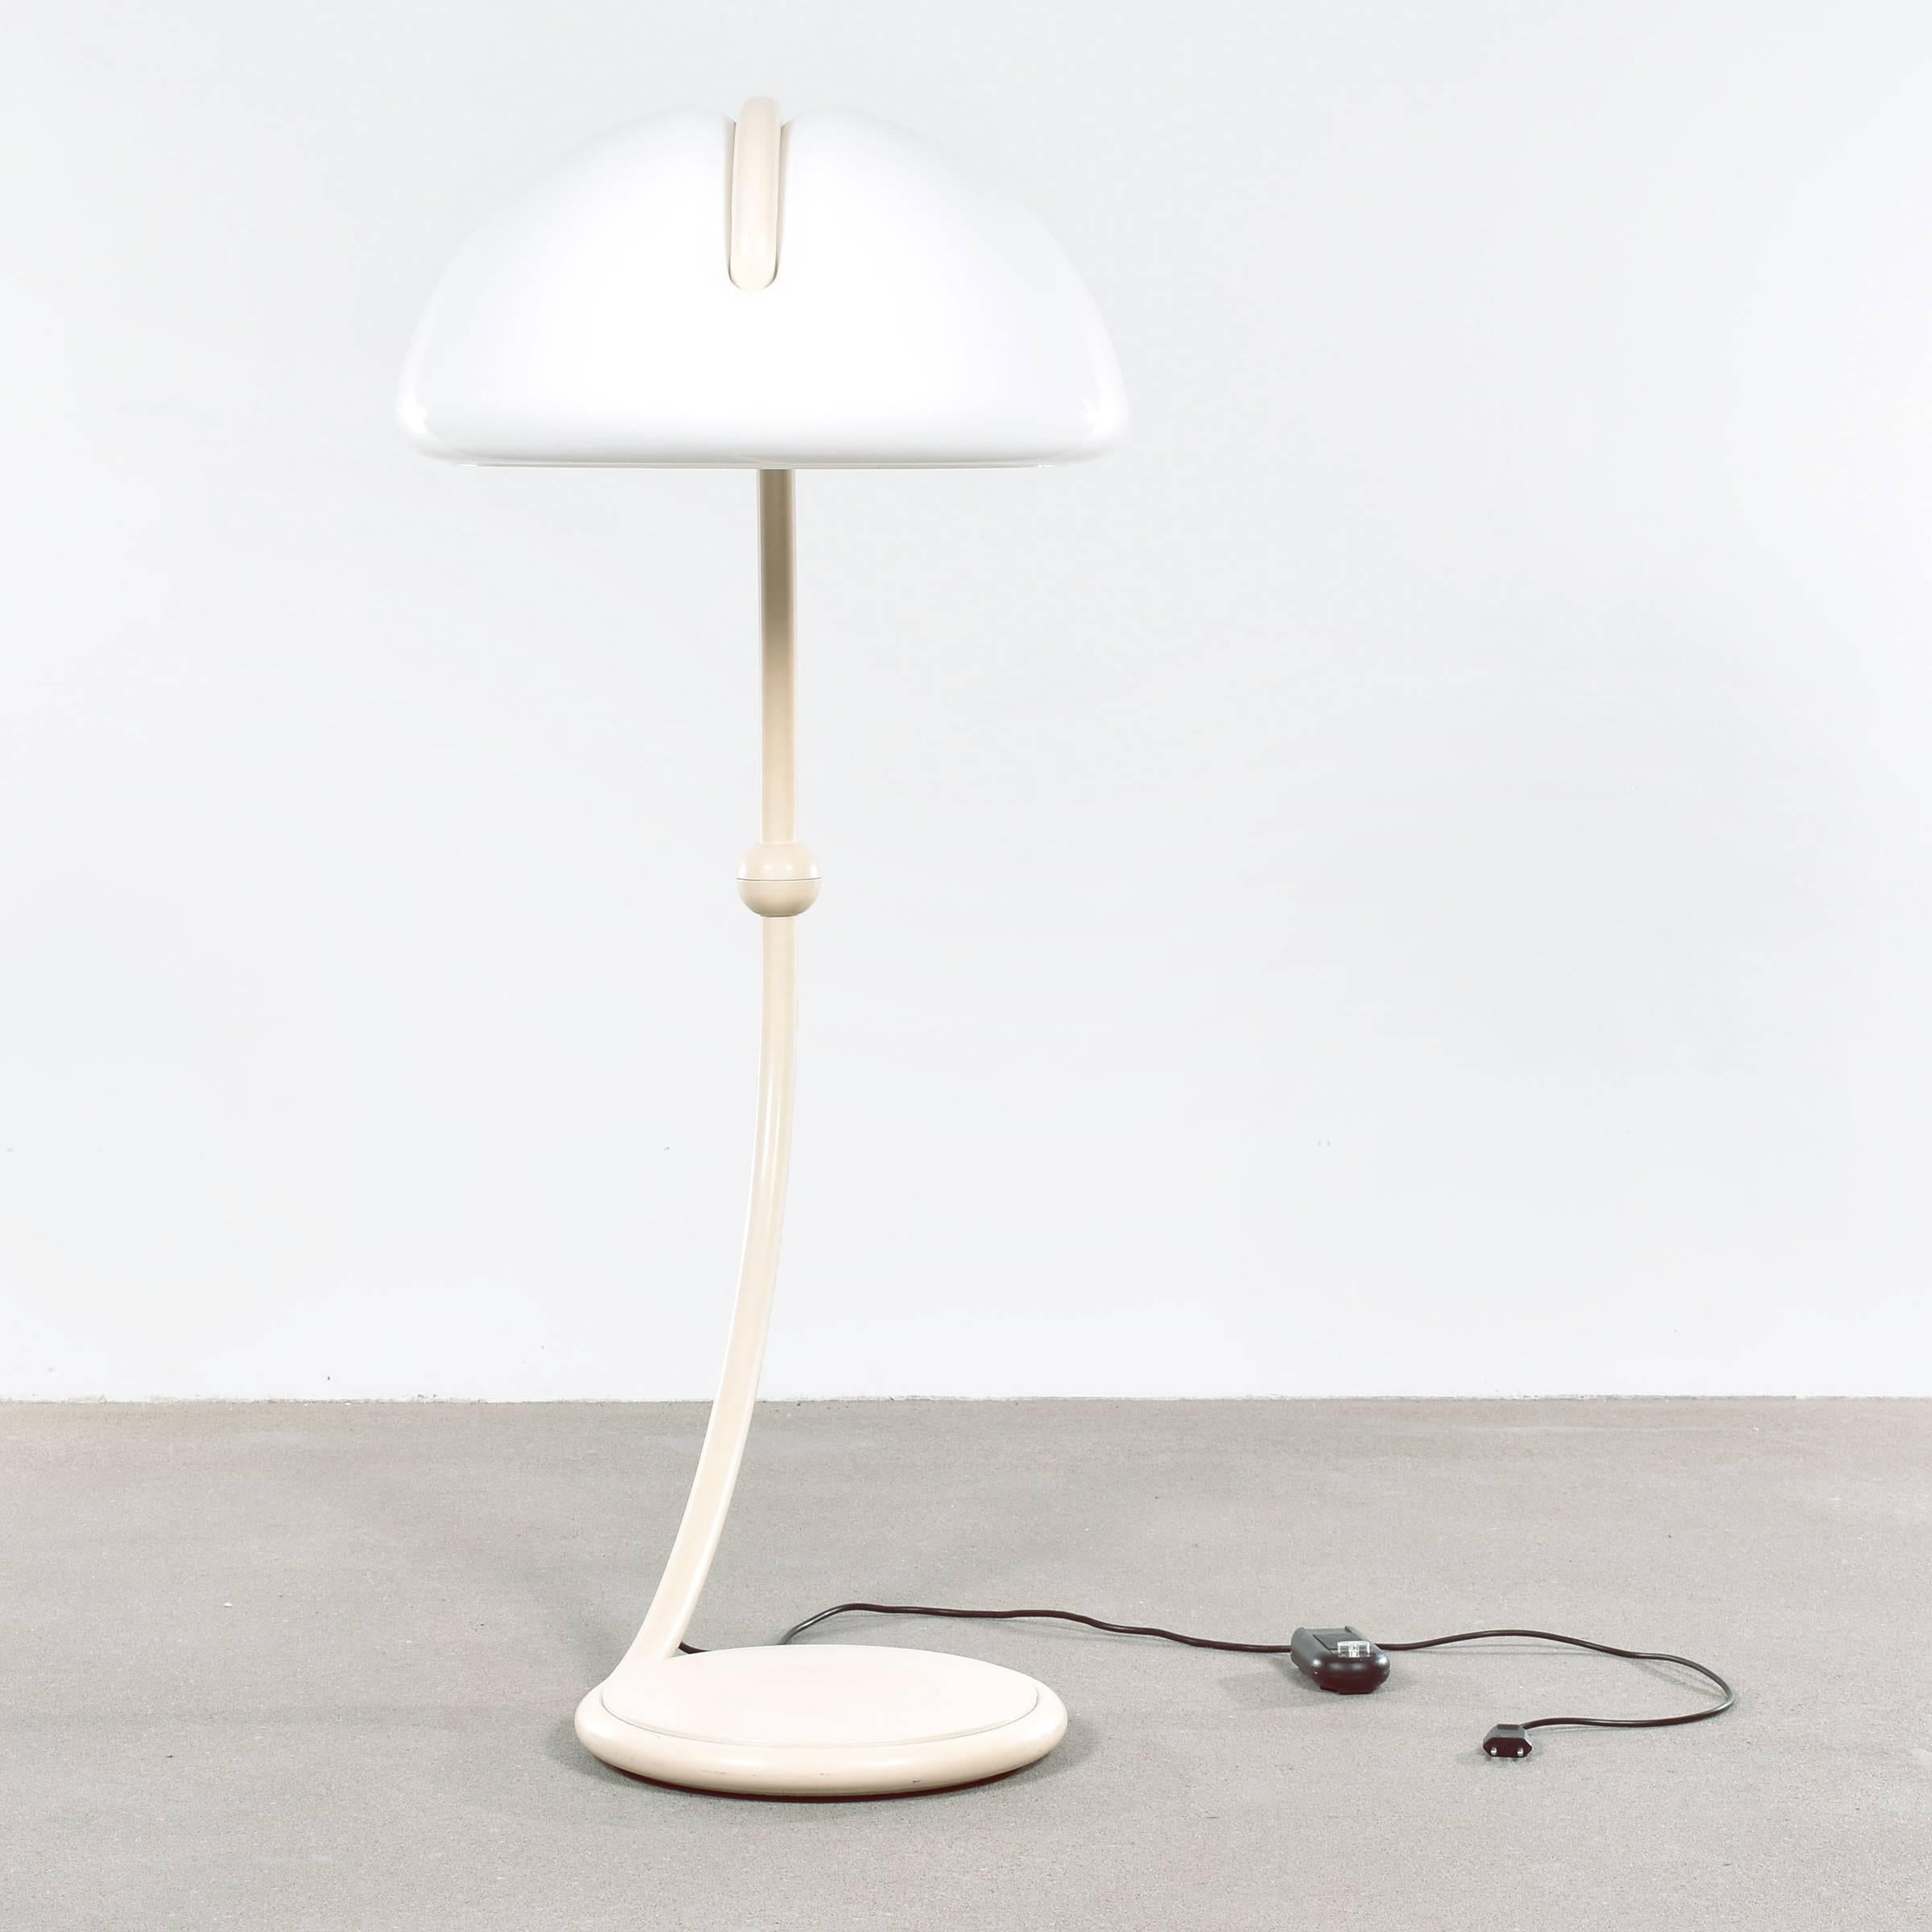 Beautiful, elegant and smart designed floor lamp with rotatable upper arm. Very good original condition, signed with manufacturer's label bottom standard.